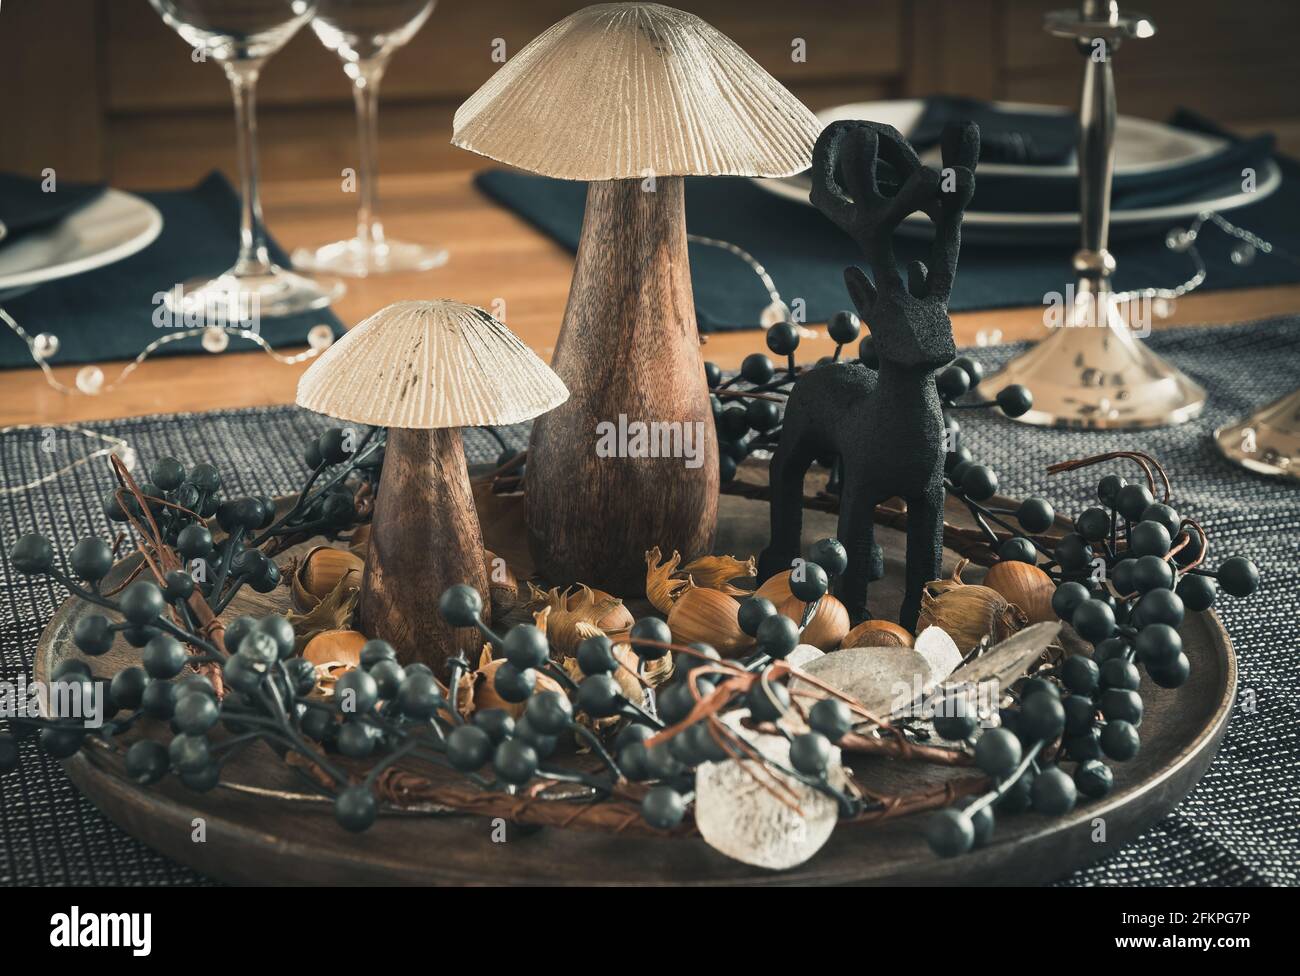 Autumnal table decoration with wooden mushrooms, berry wreath, hazelnuts and a wooden deer, dominated by dark blue, silver and wood colors Stock Photo